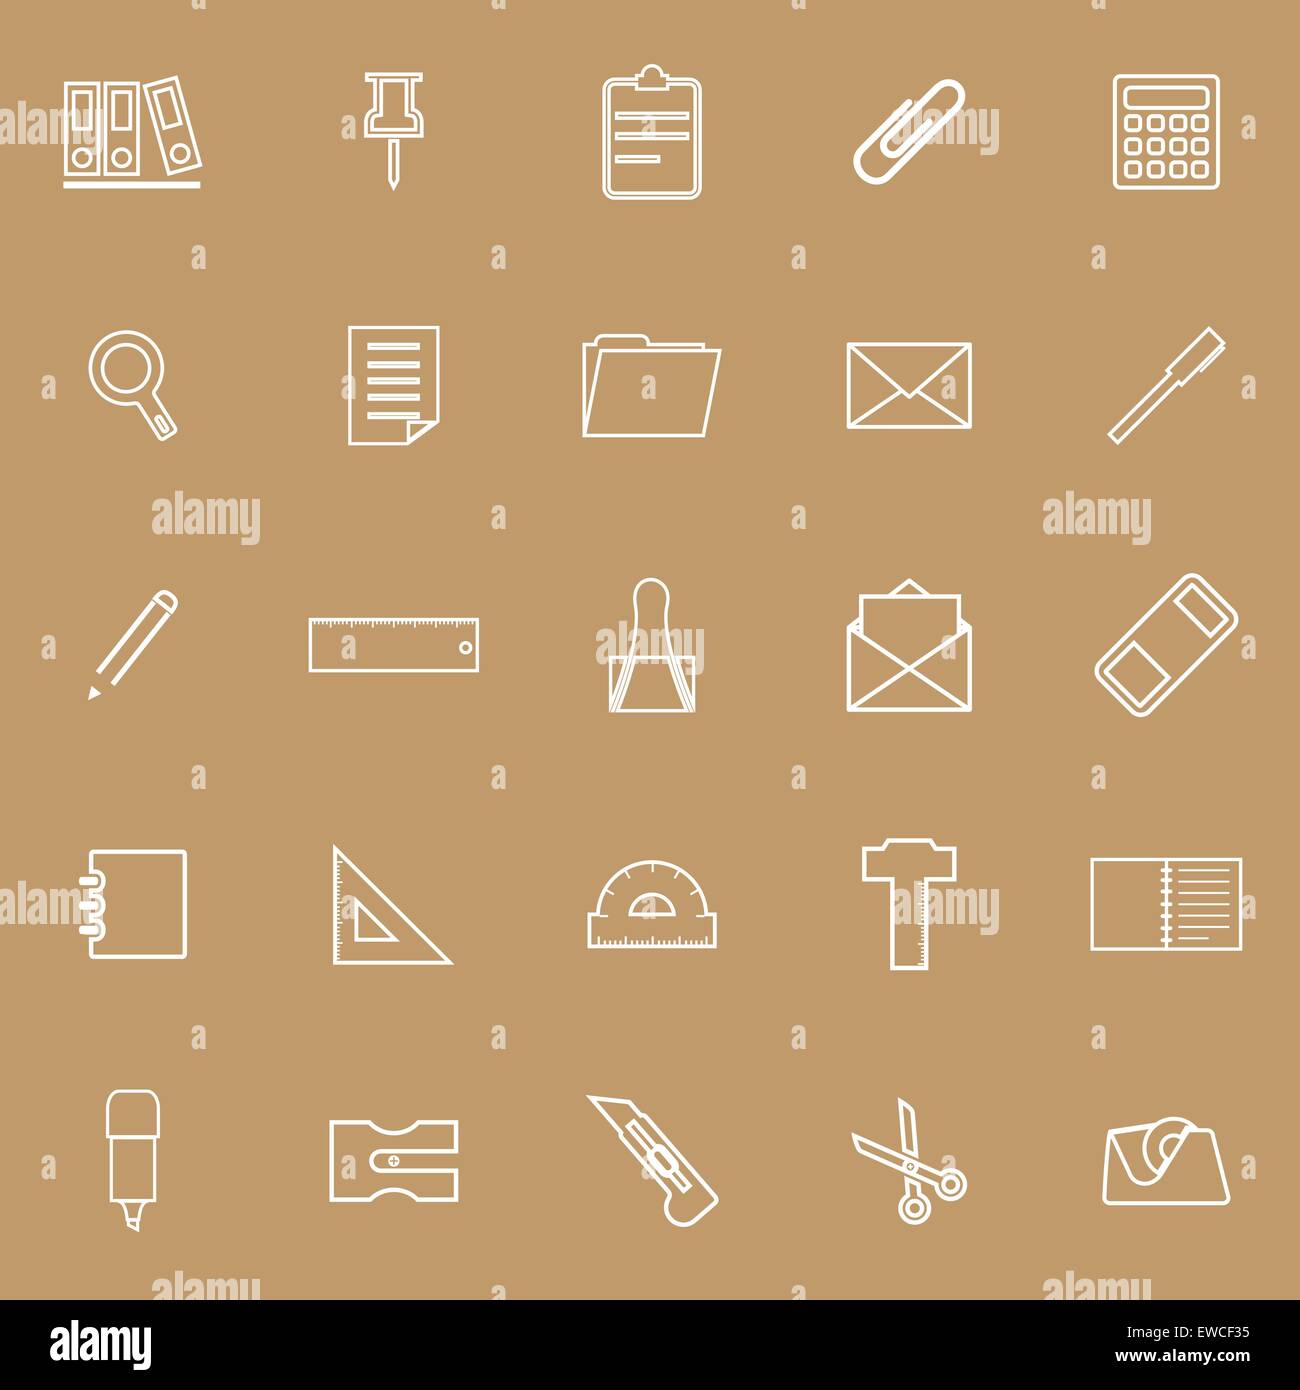 Stationery line icons on brown background, stock vector Stock Vector